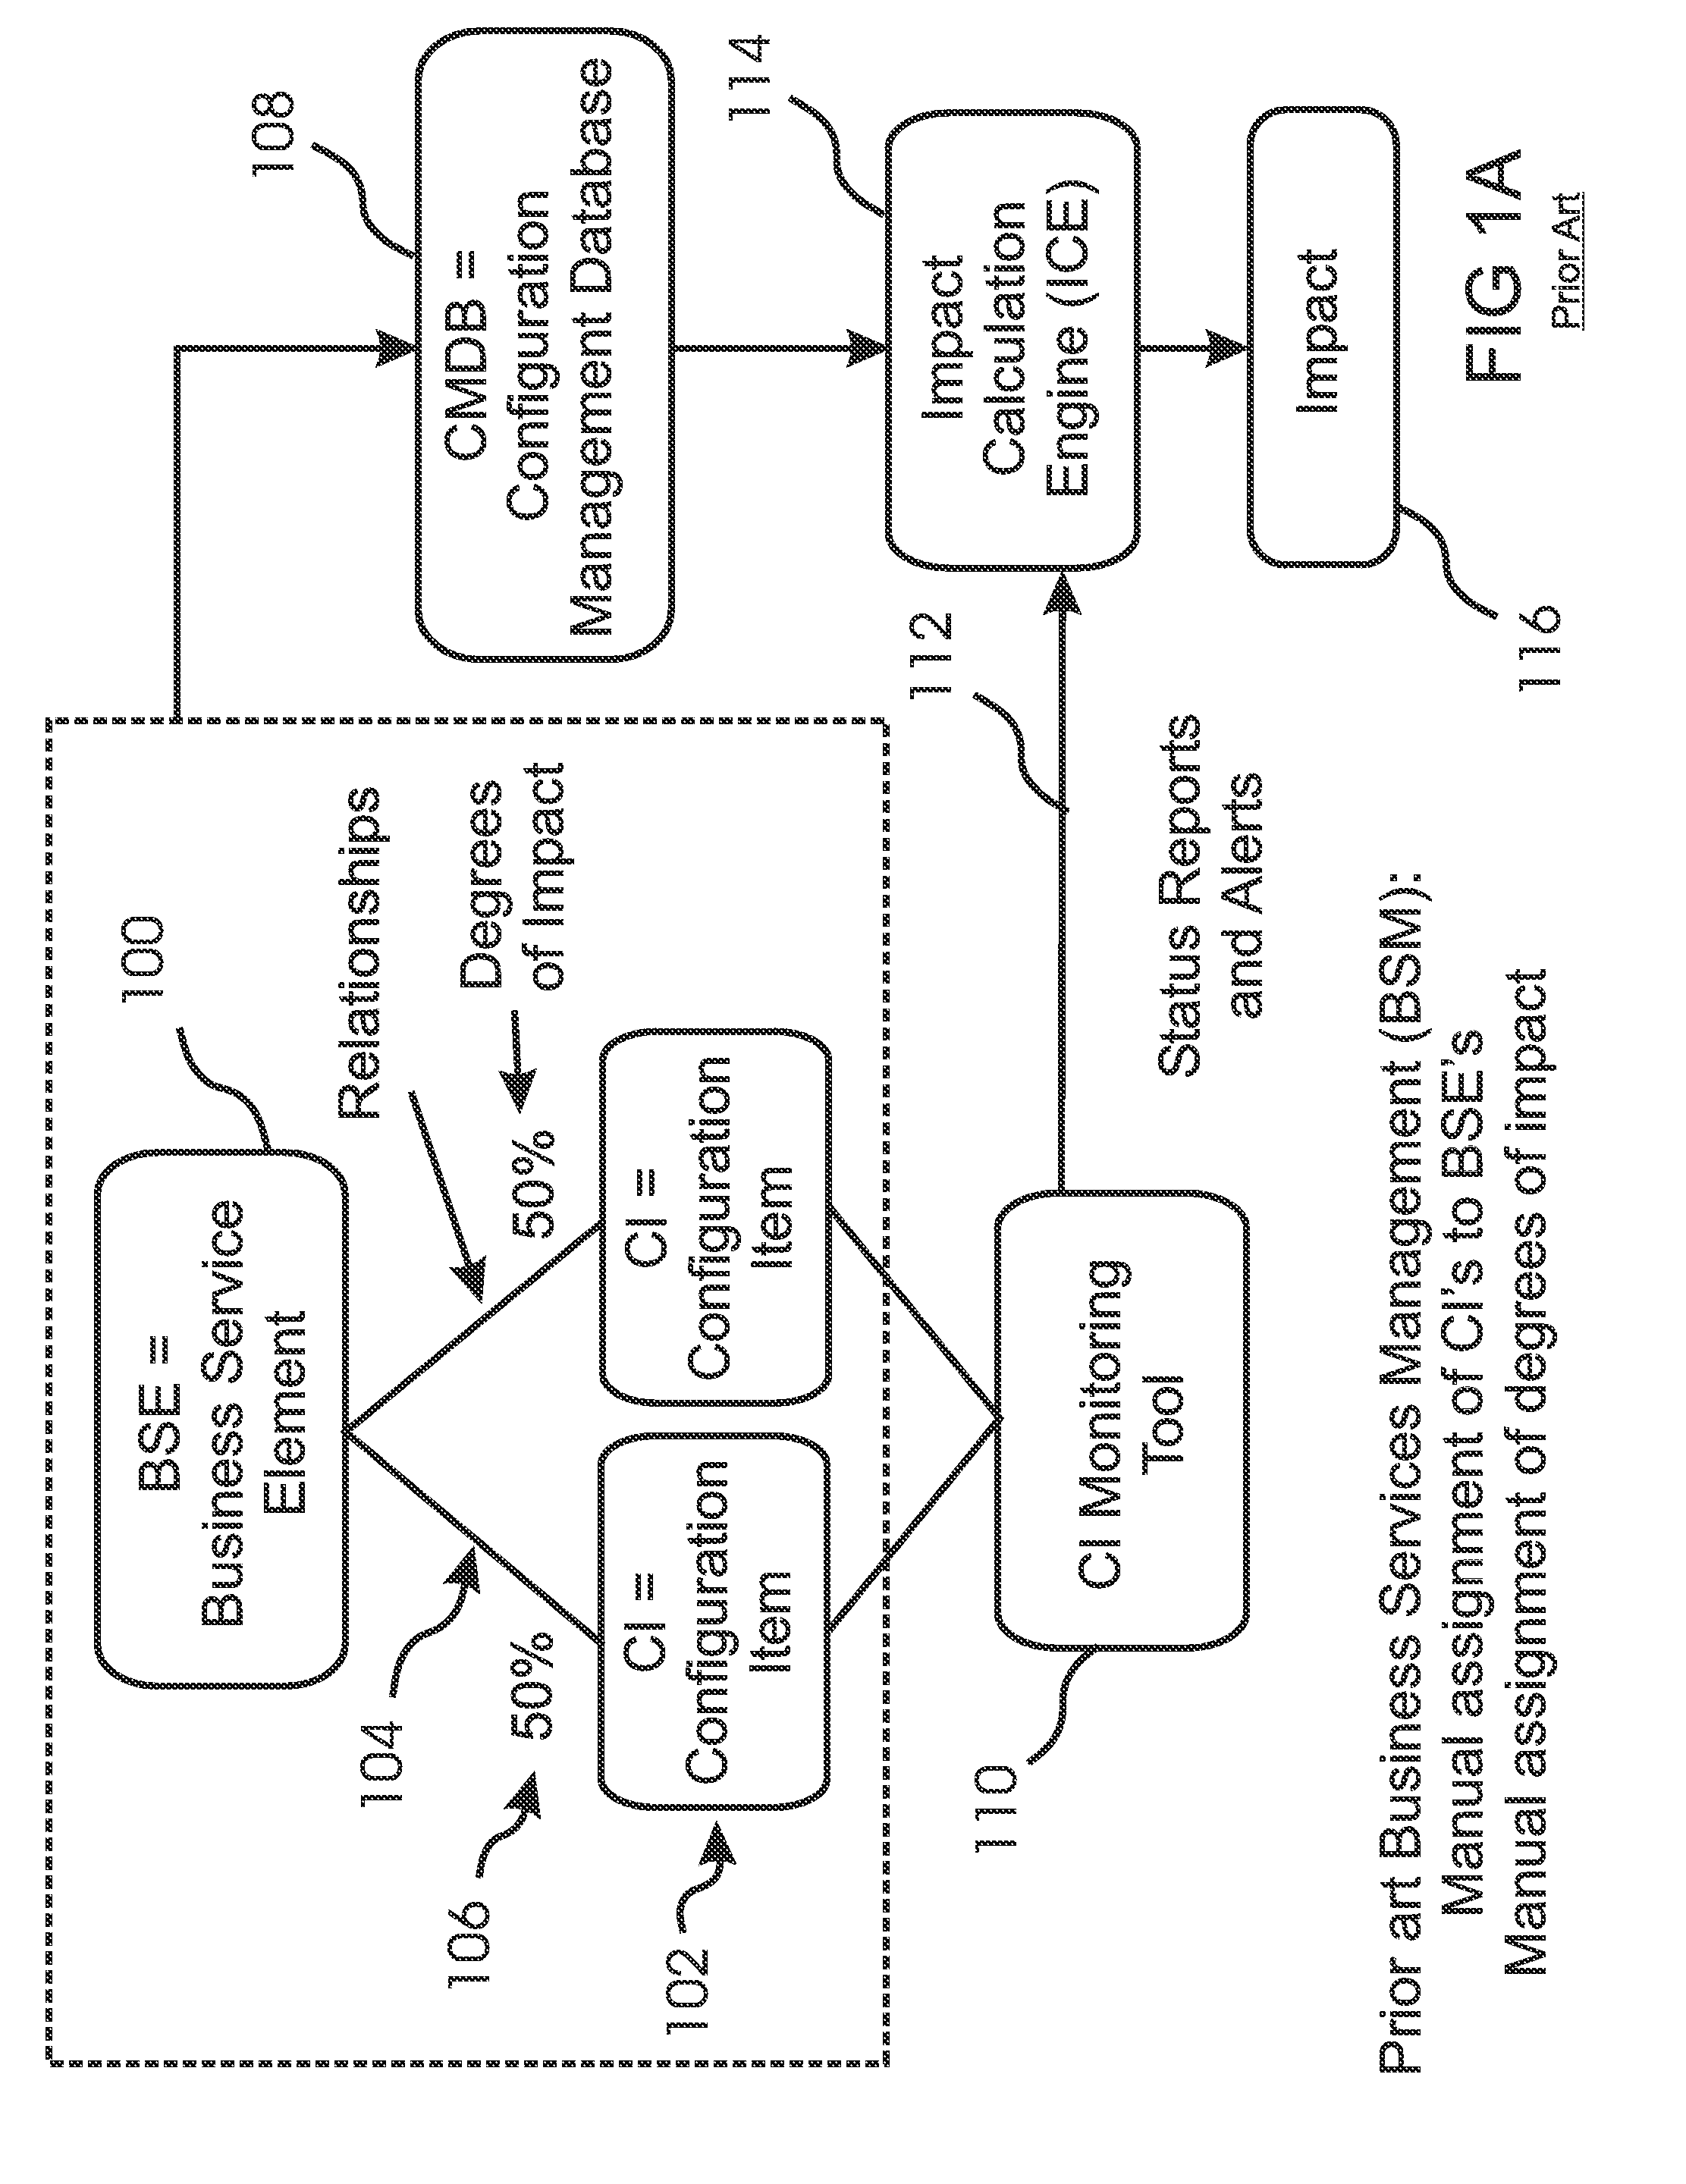 Balanced Scorecard Method for Determining an Impact on a Business Service Caused by Degraded Operation of an IT System Component